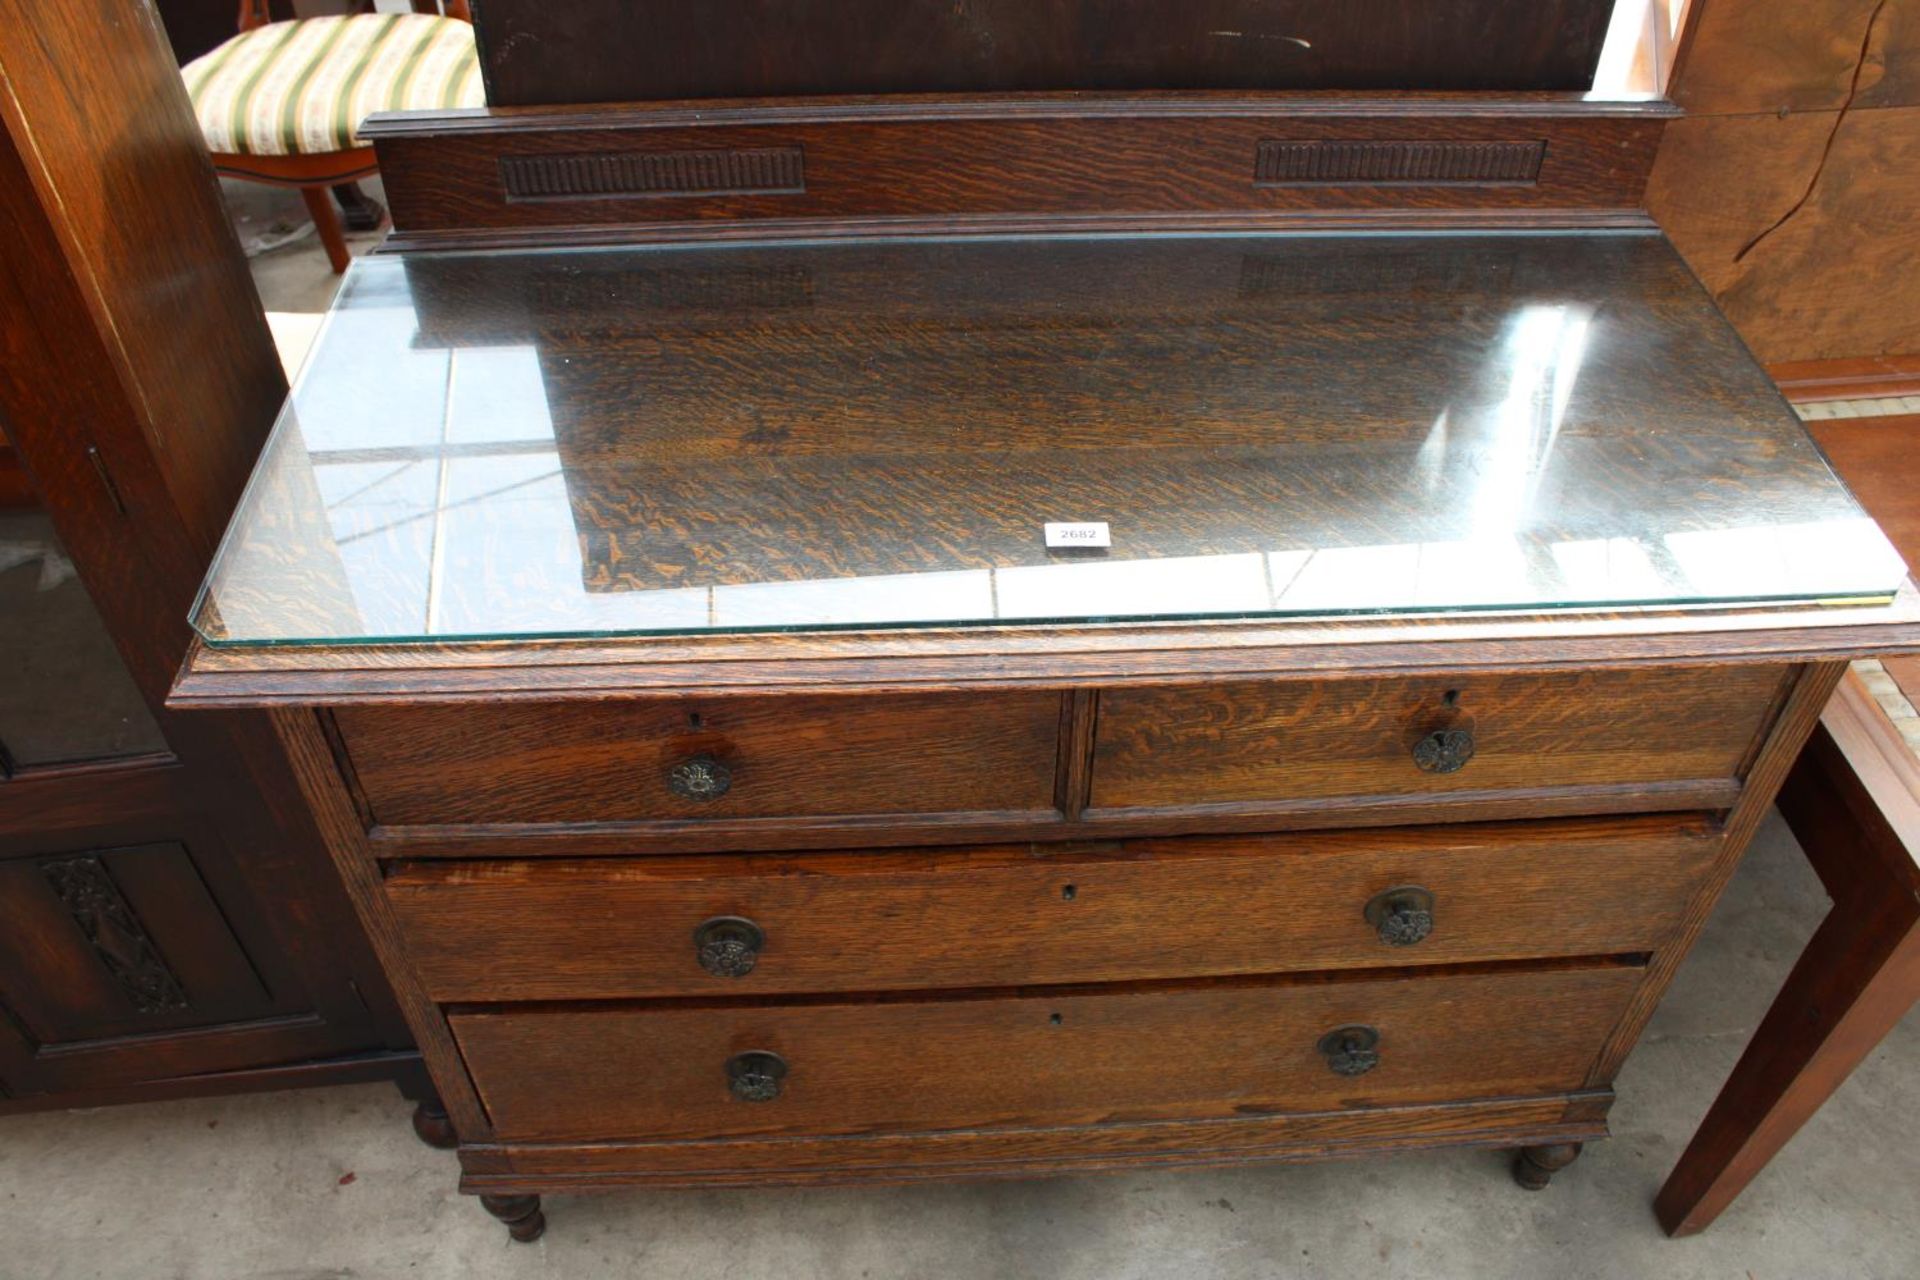 AN EARLY 20TH CENTURY OAK CHEST OF 2 SHORT AND 2 LONG DRAWERS, 42" WIDE